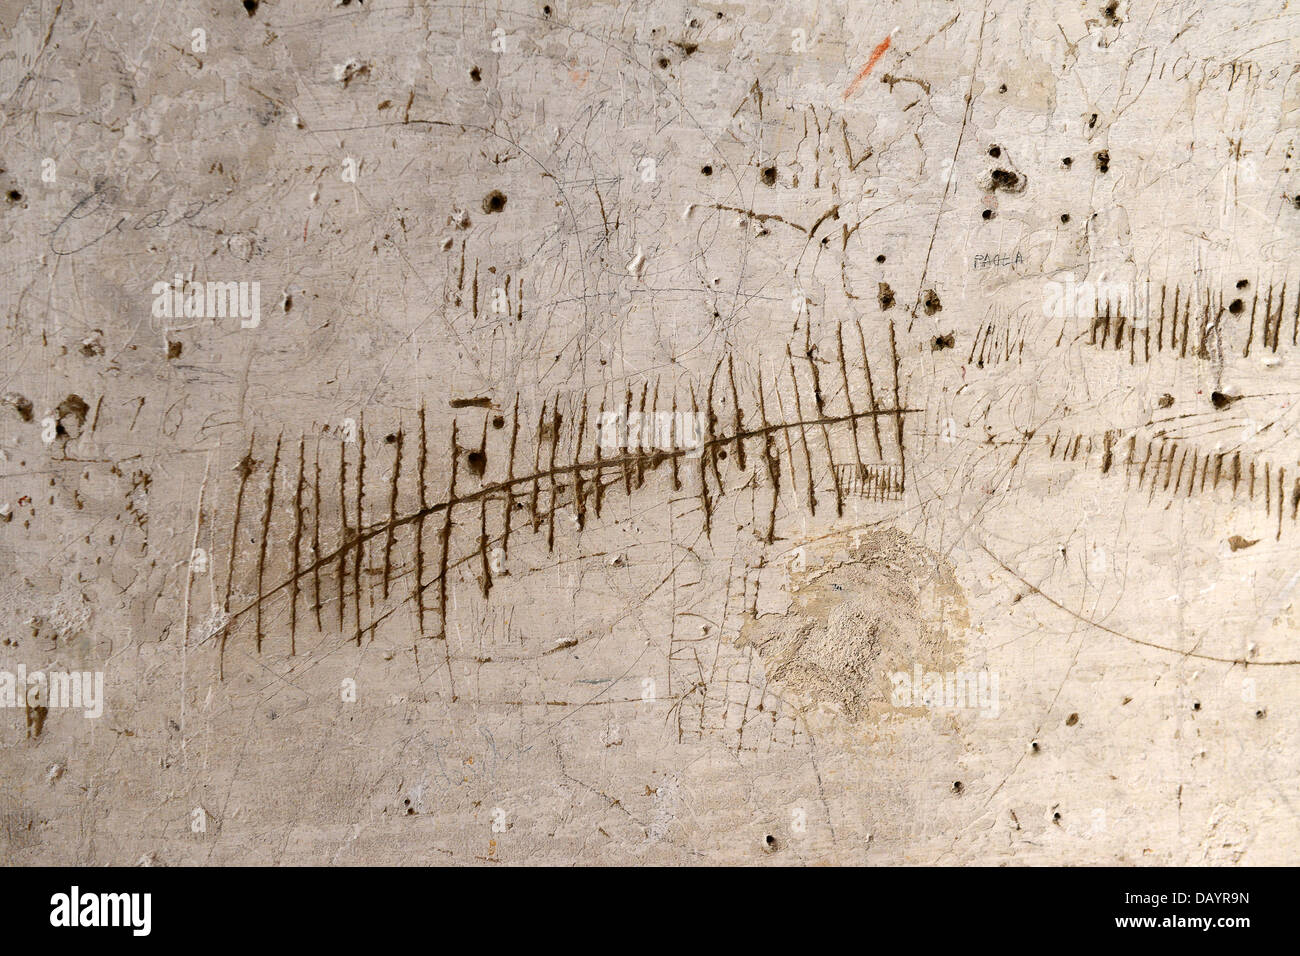 Graffiti and markings made by 18th century prisoners in the dungeon at Dozza Castle in Italy Stock Photo